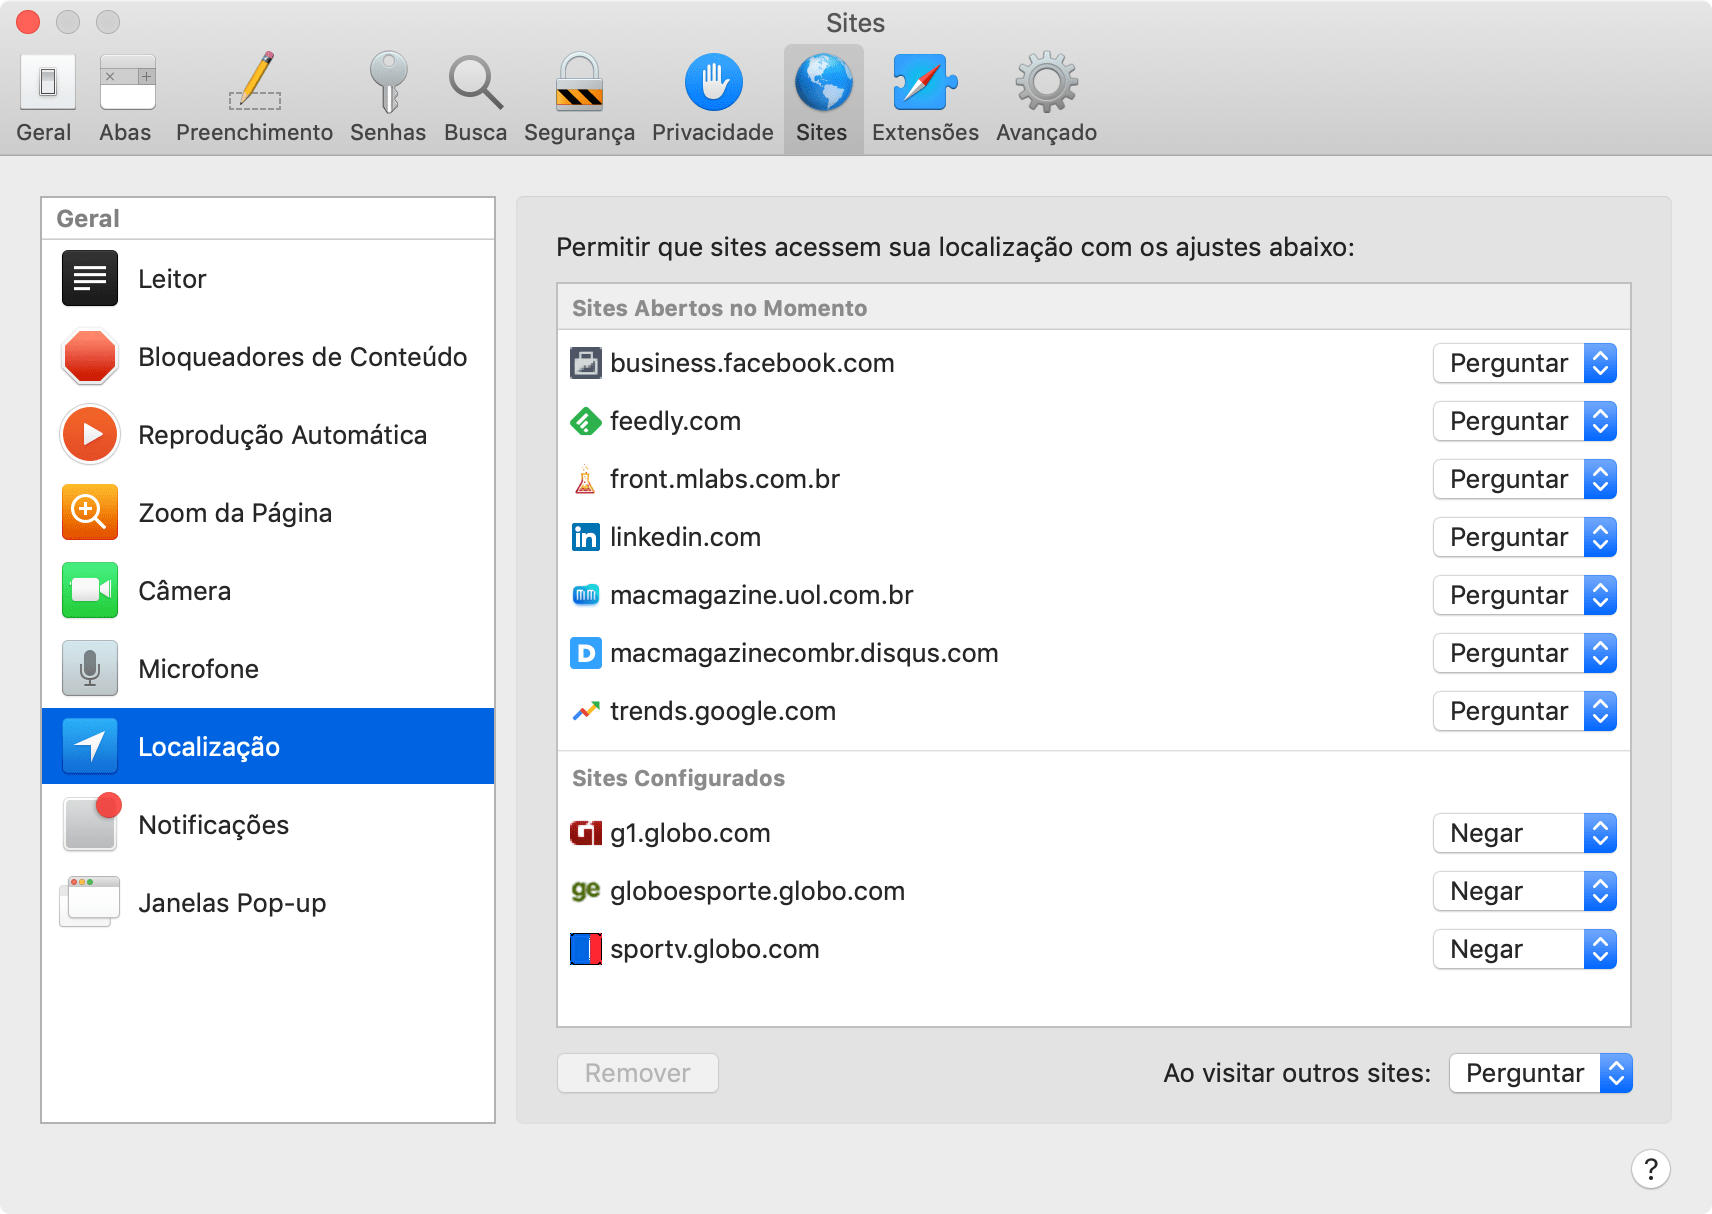 Location services on macOS